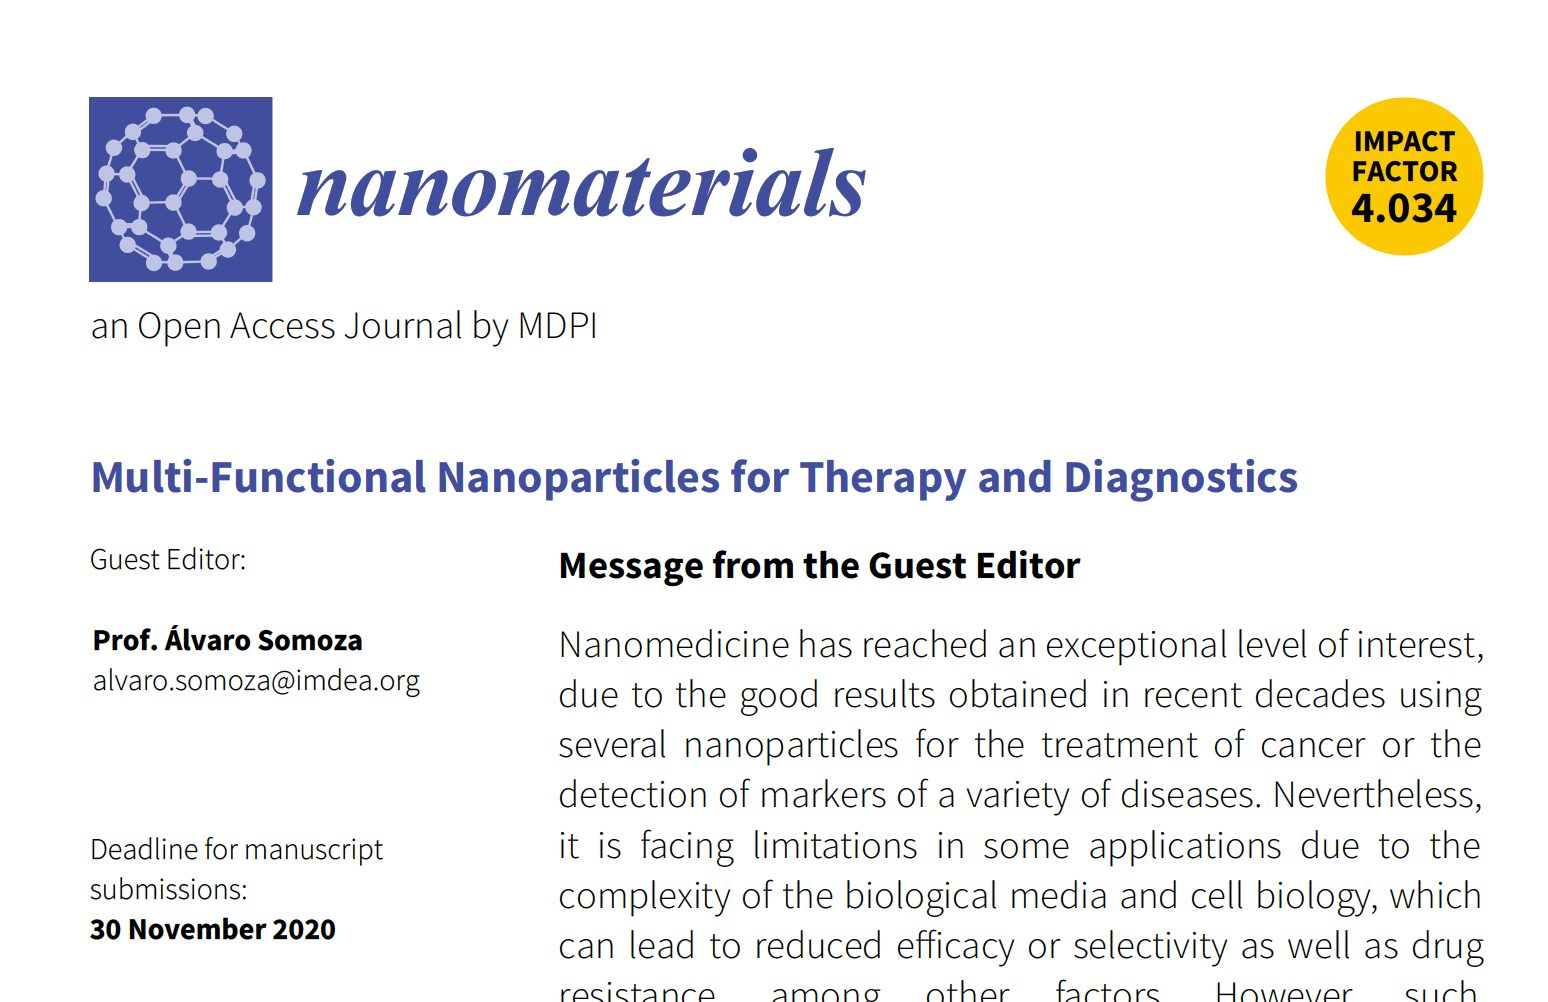 Submit your article! Special Issue “Multi-Functional Nanoparticles for Therapy and Diagnostics” in Nanomaterials Journal